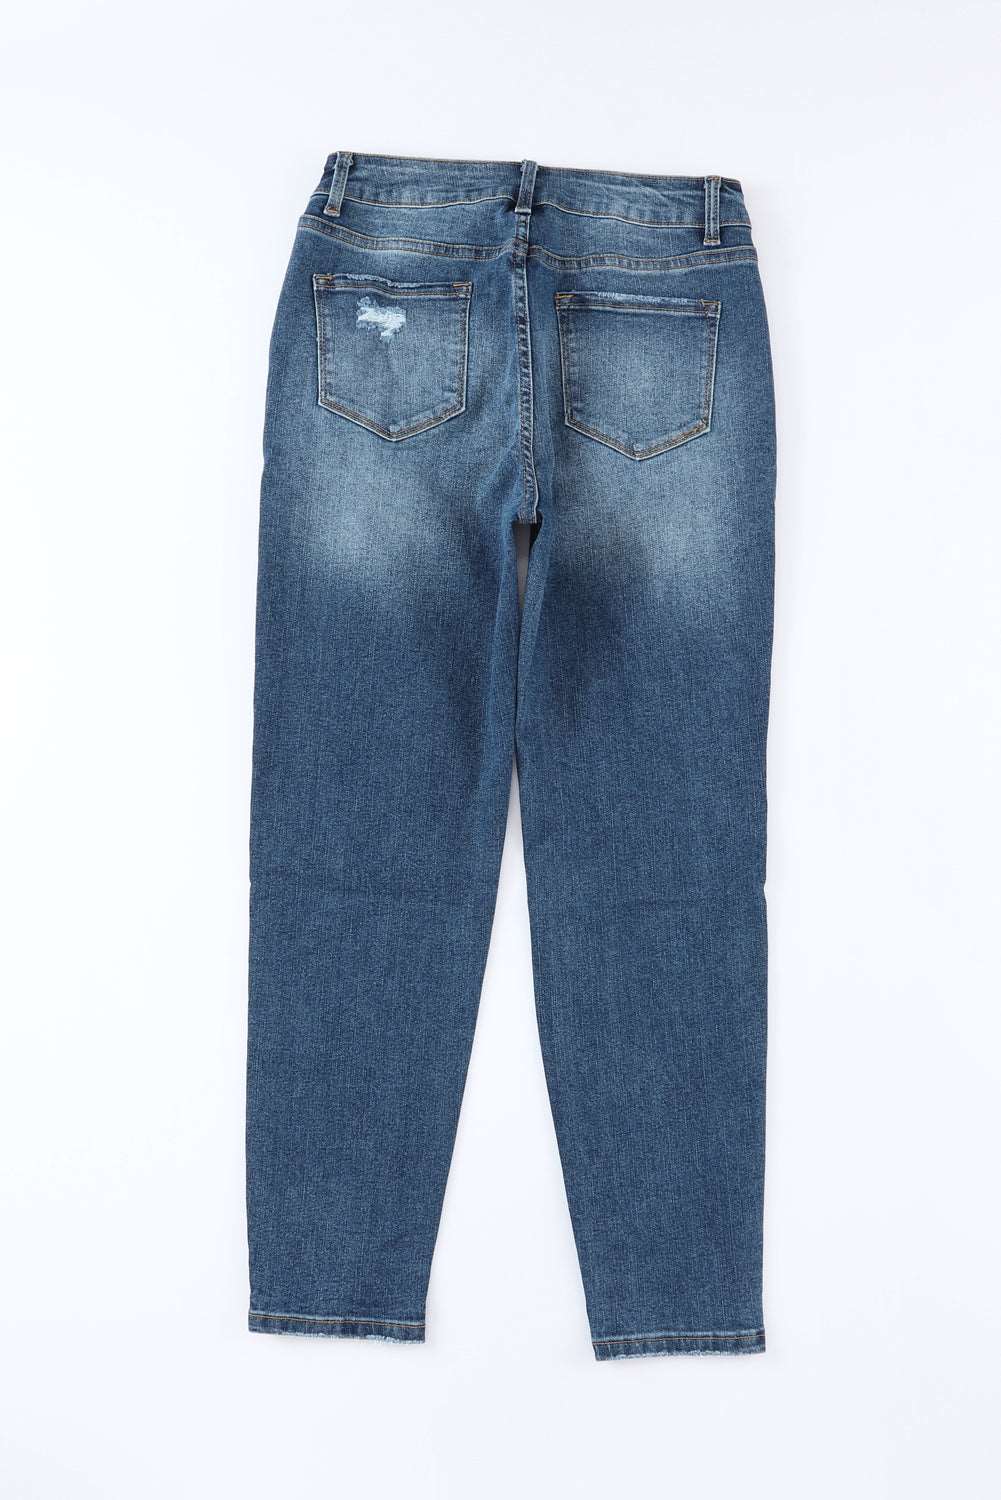 Button-Fly Distressed Jeans with Pockets Bottom wear